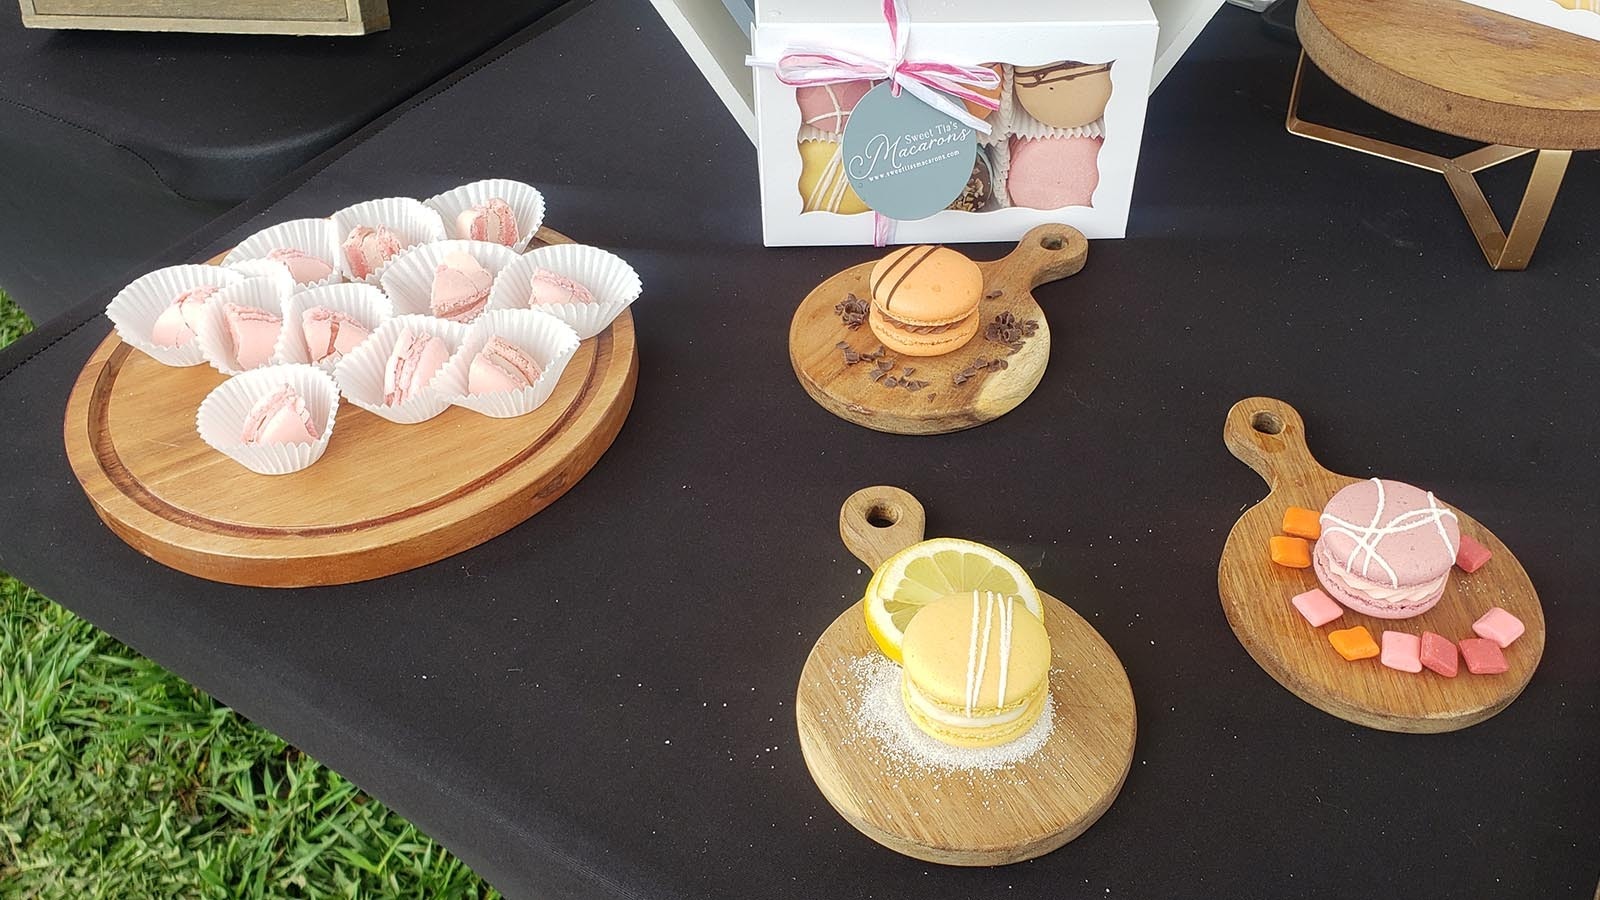 Homemade macarons are among the items at the farmers' market.